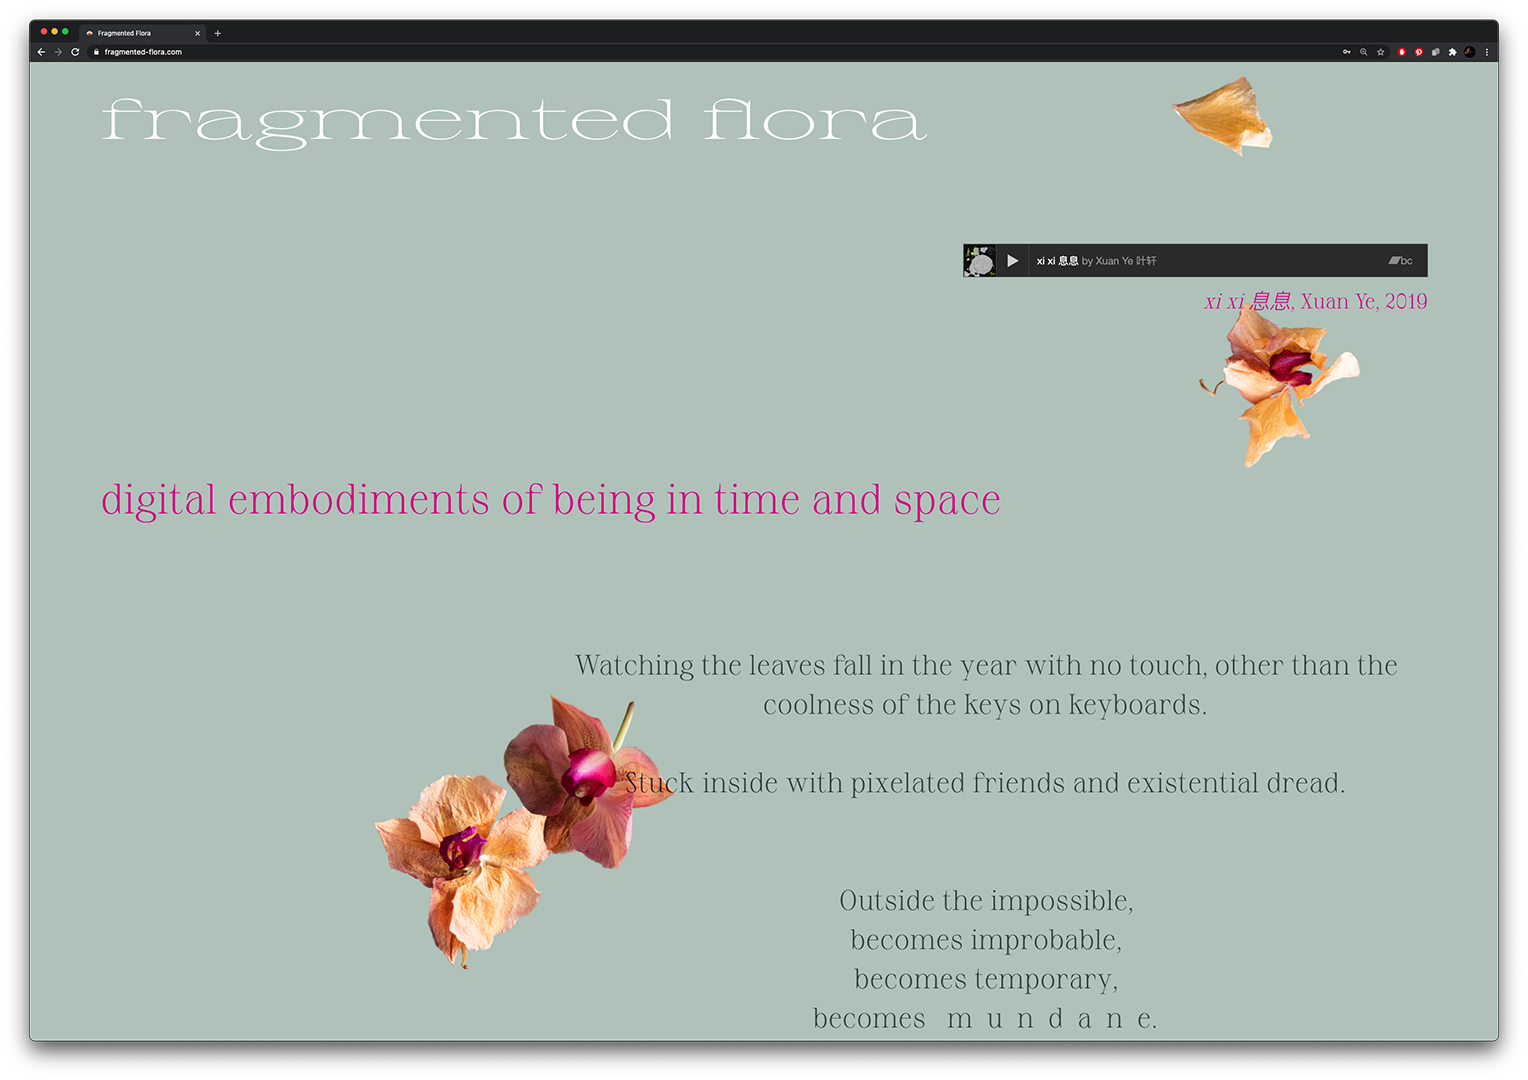 Fragmented Flora: Digital Embodiments of Being in Time and Space